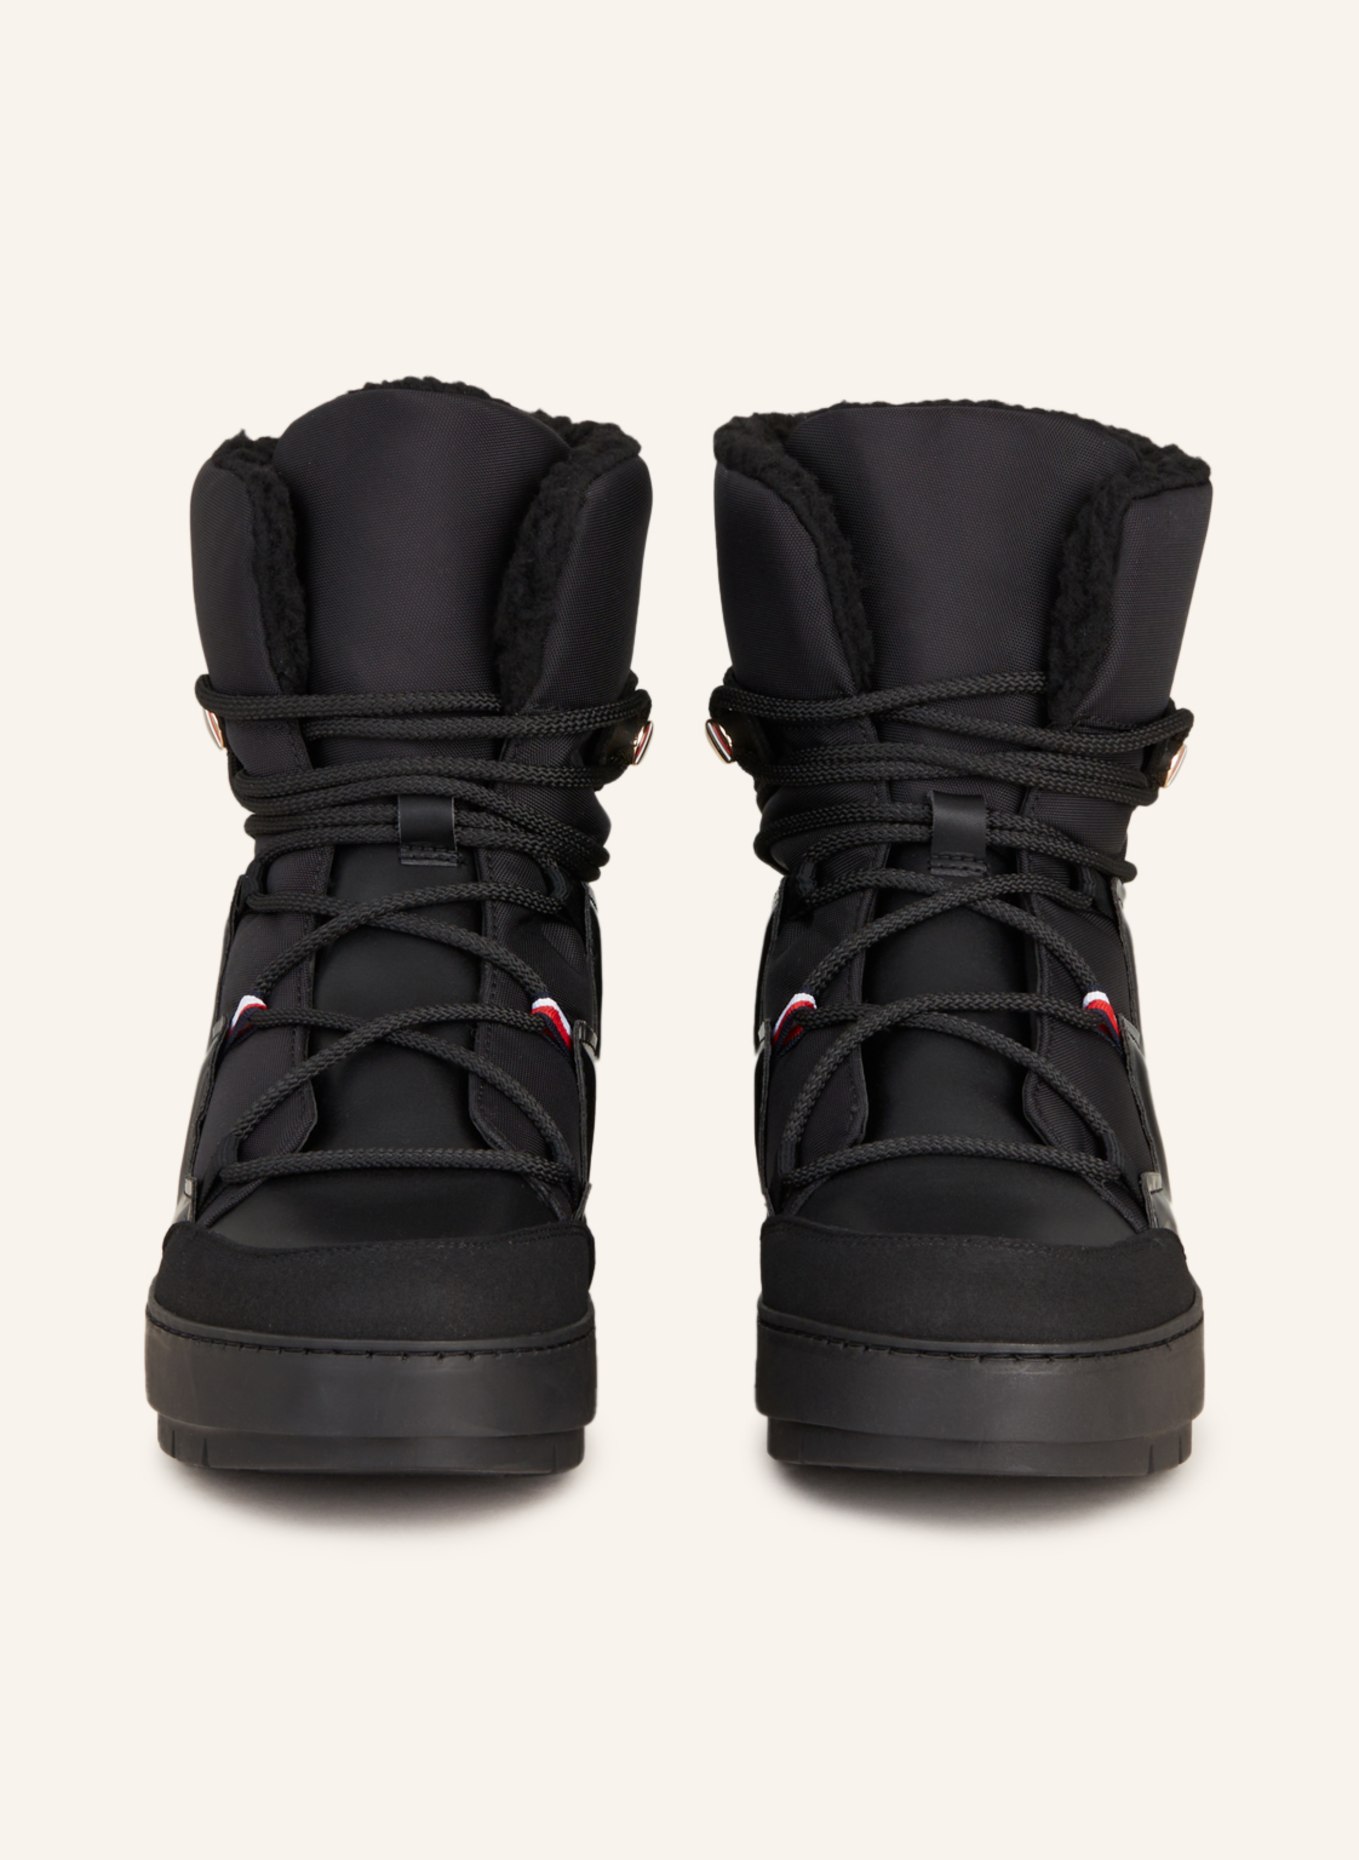 boots TOMMY HILFIGER in black Lace-up